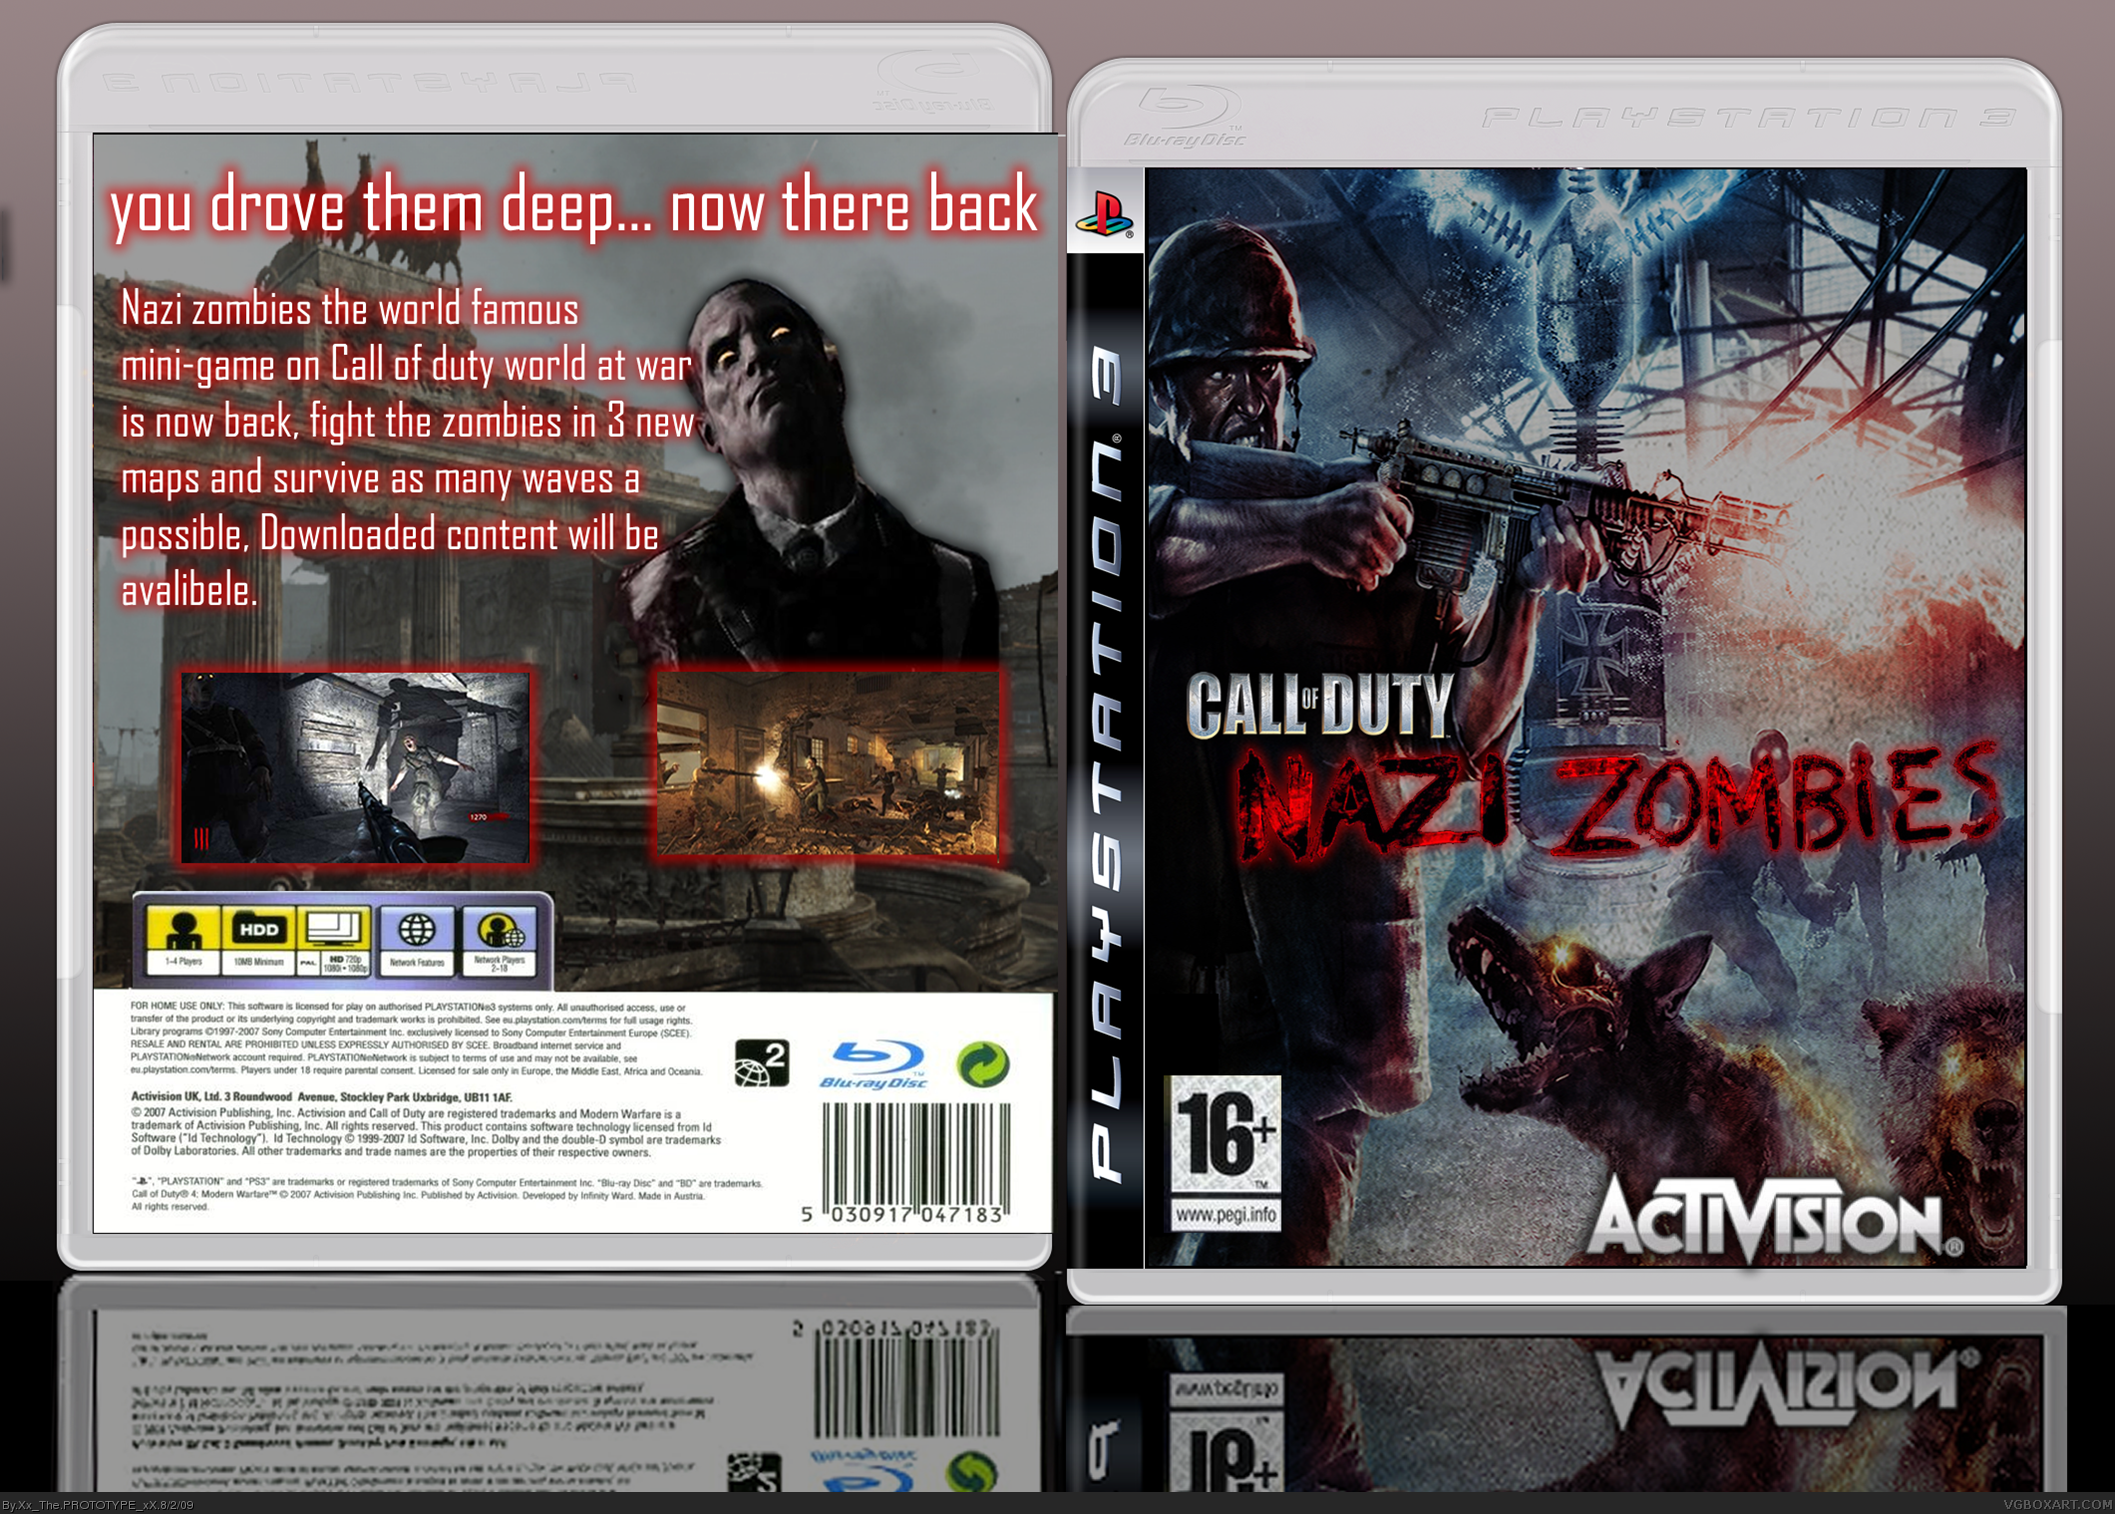 Call of Duty: Zombies